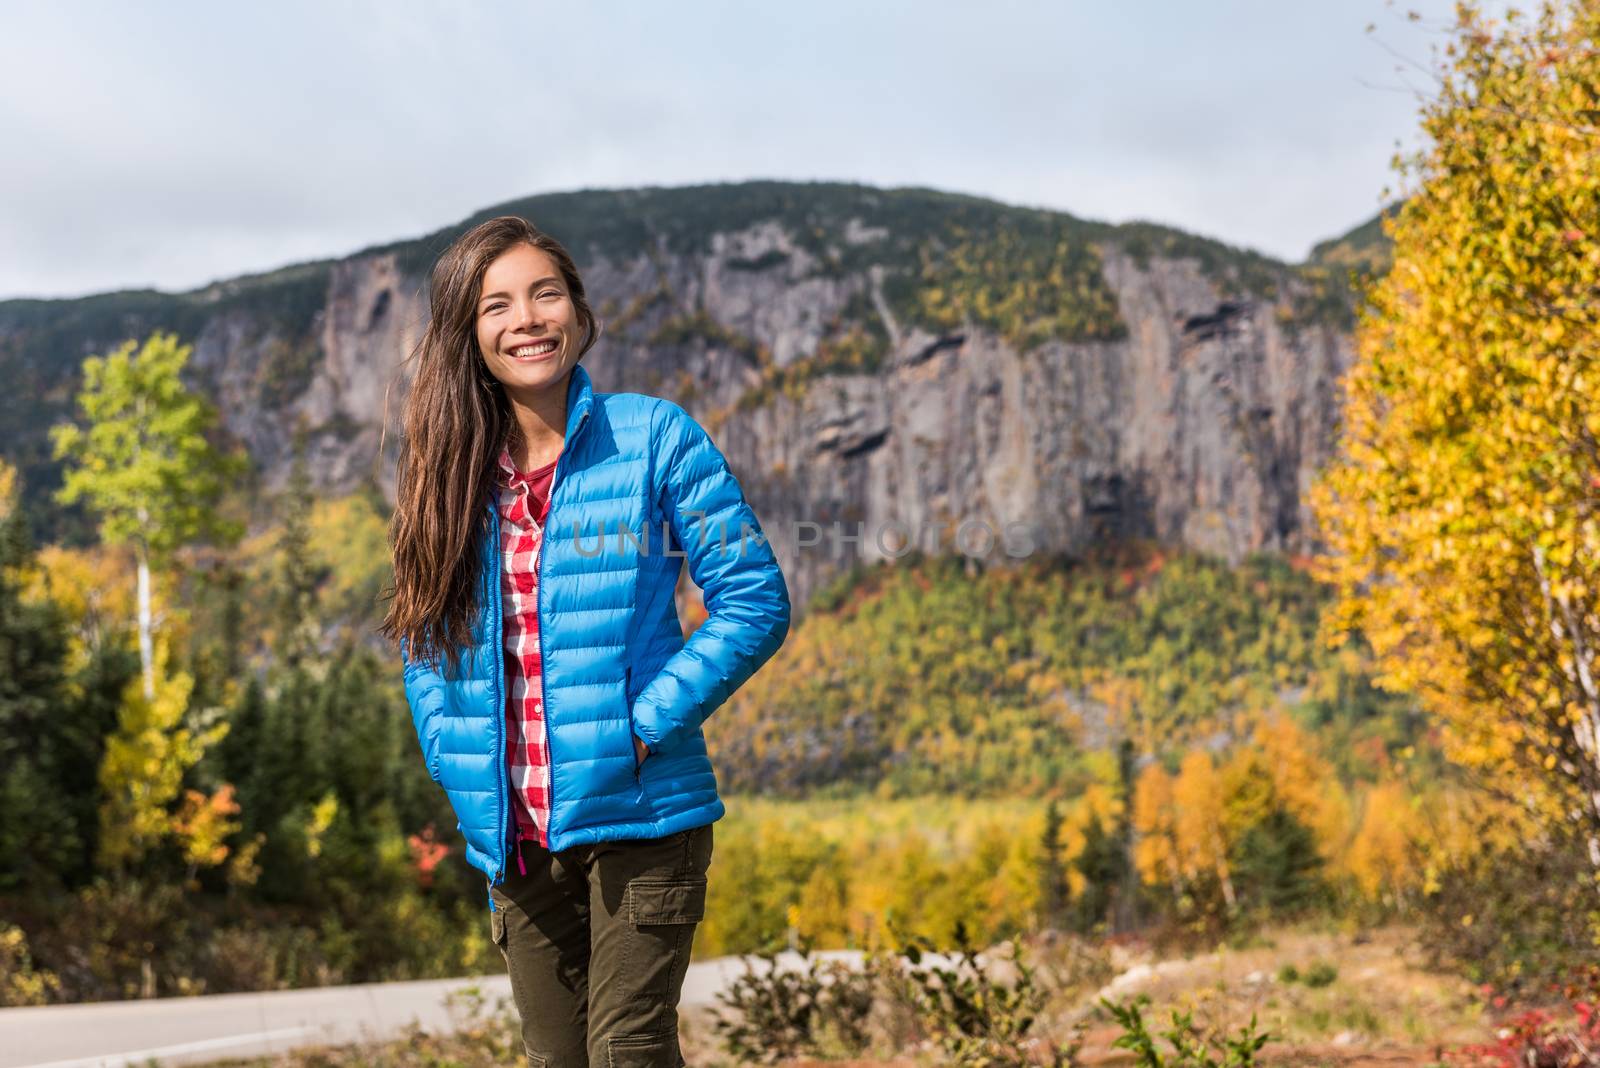 Autumn nature lifestyle happy asian woman relaxing outdoors on camping travel park with mountain background. Hiking girl wearing blue down jacket enjoying fall season scenic landscape.